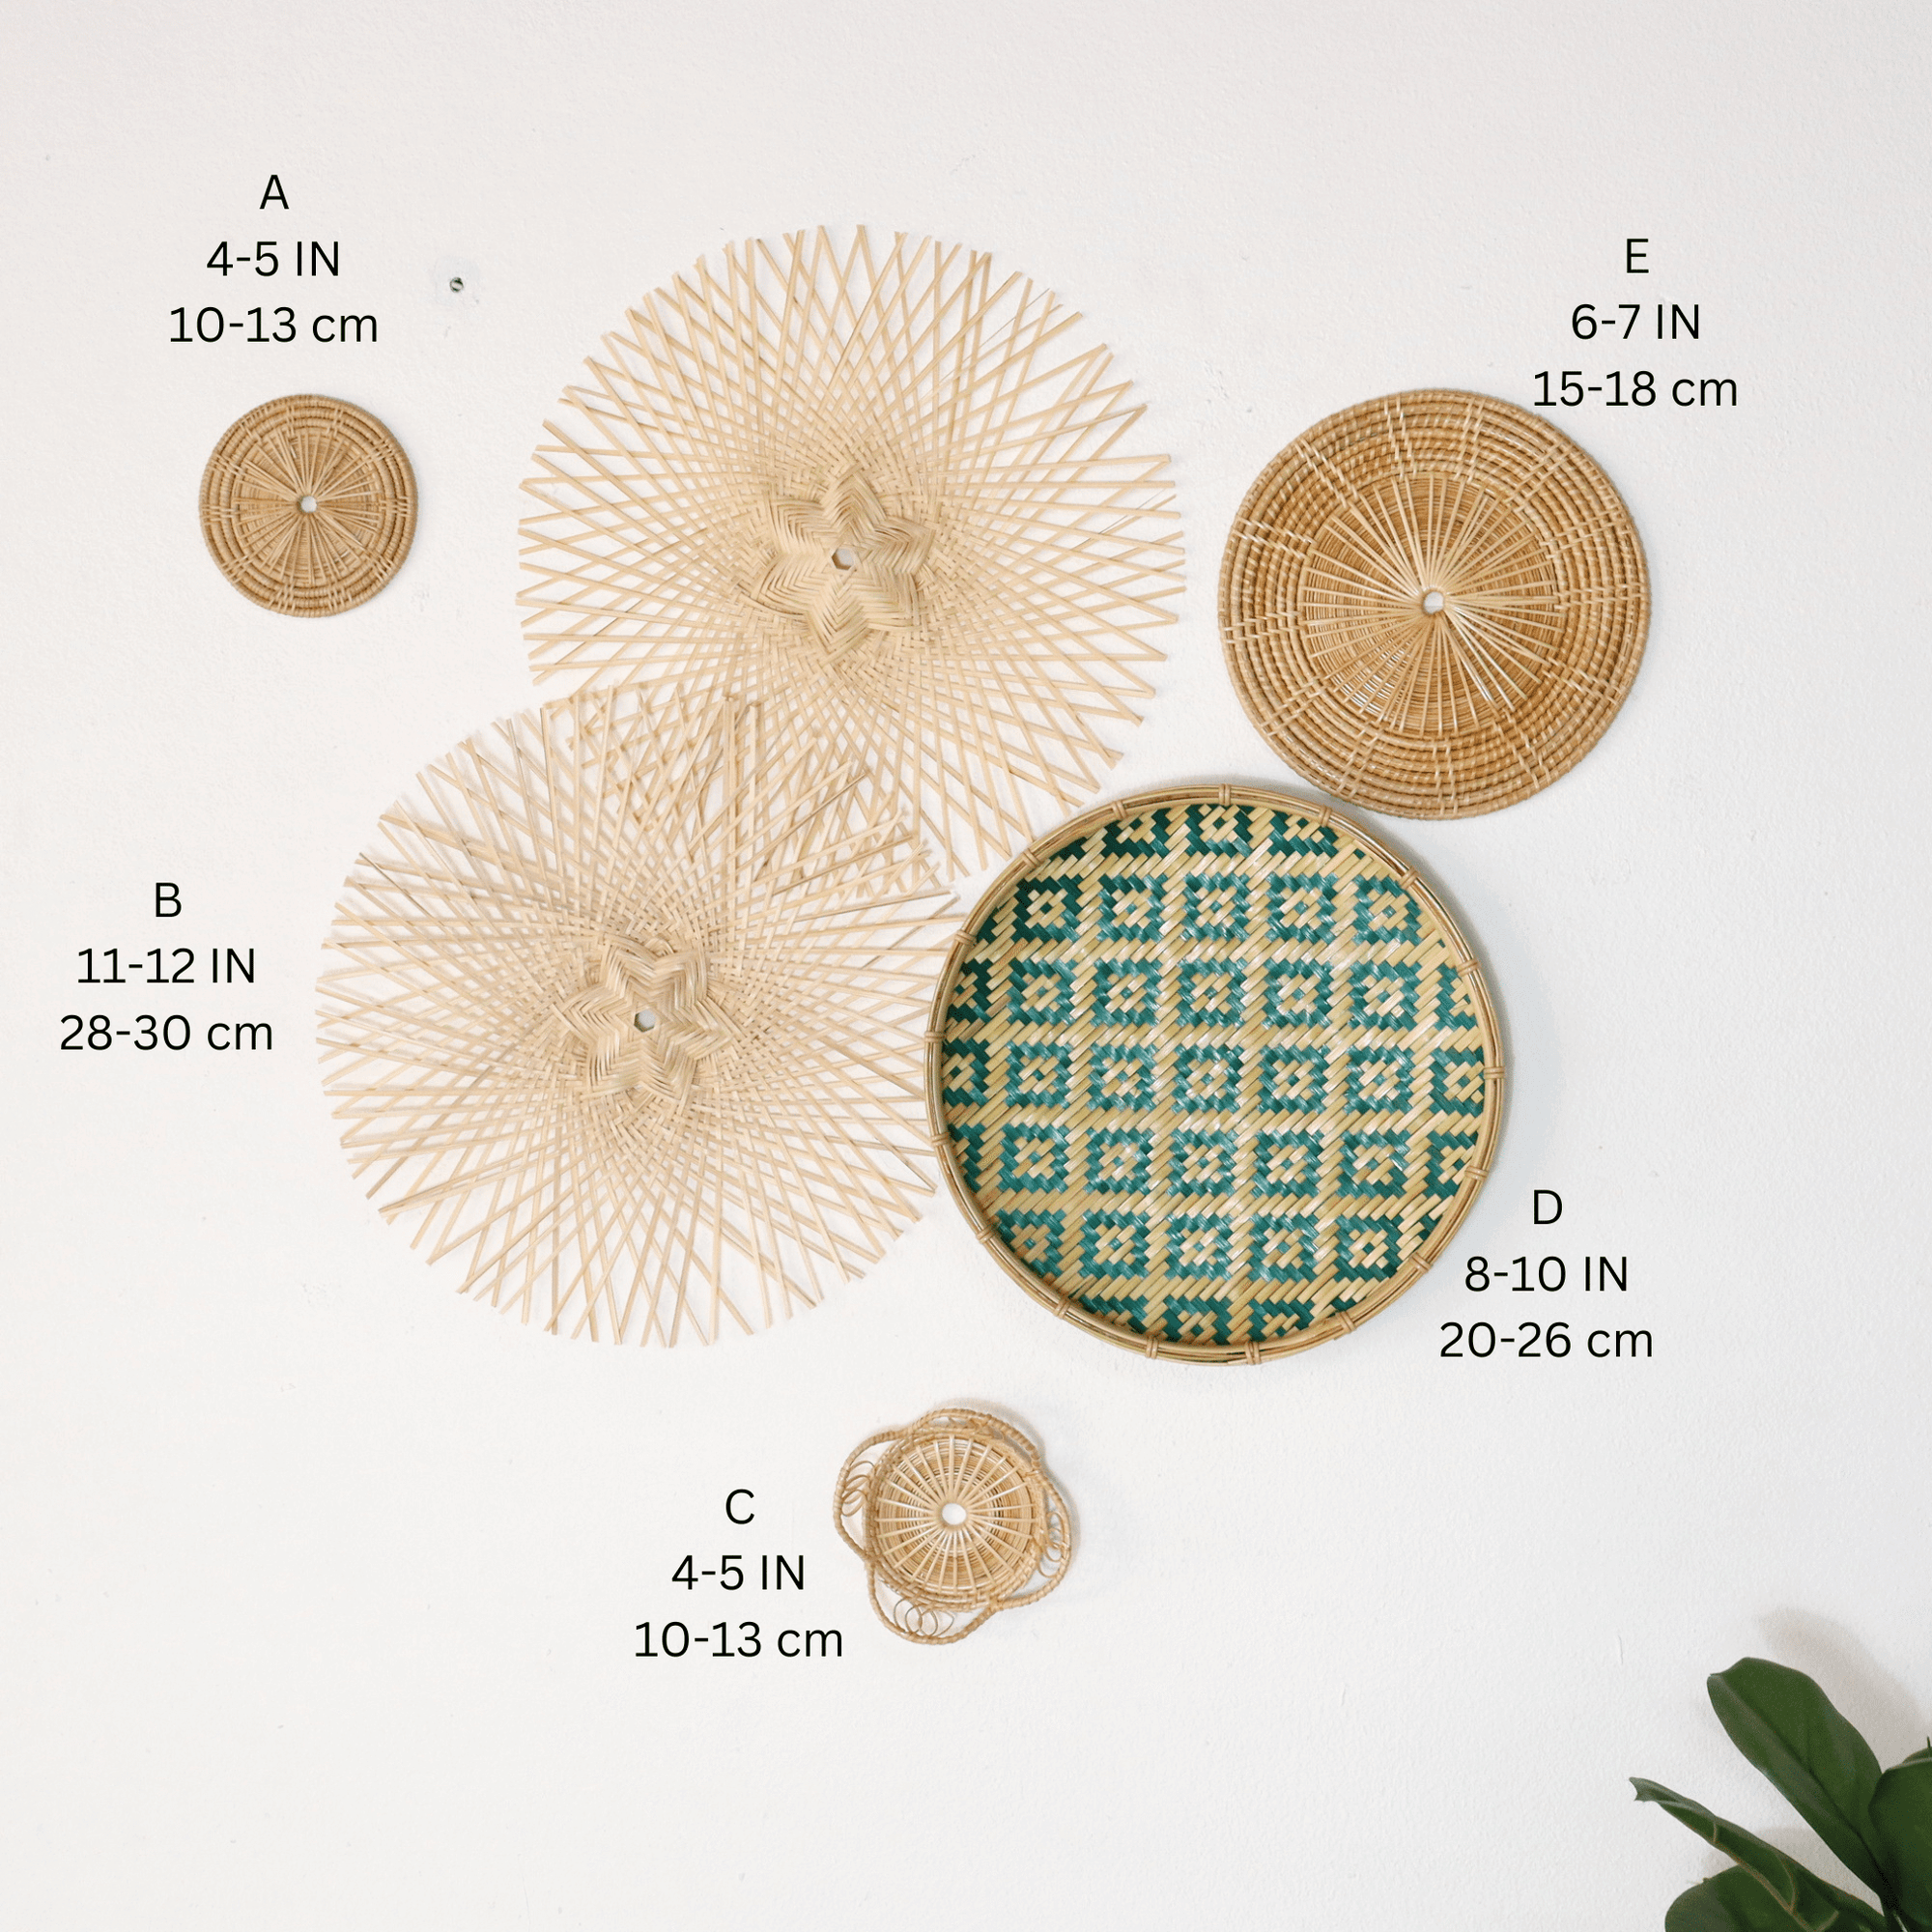 THAIHOME Wall Decor A RIN Mix-and-Match Wall Decor (Set of 6)